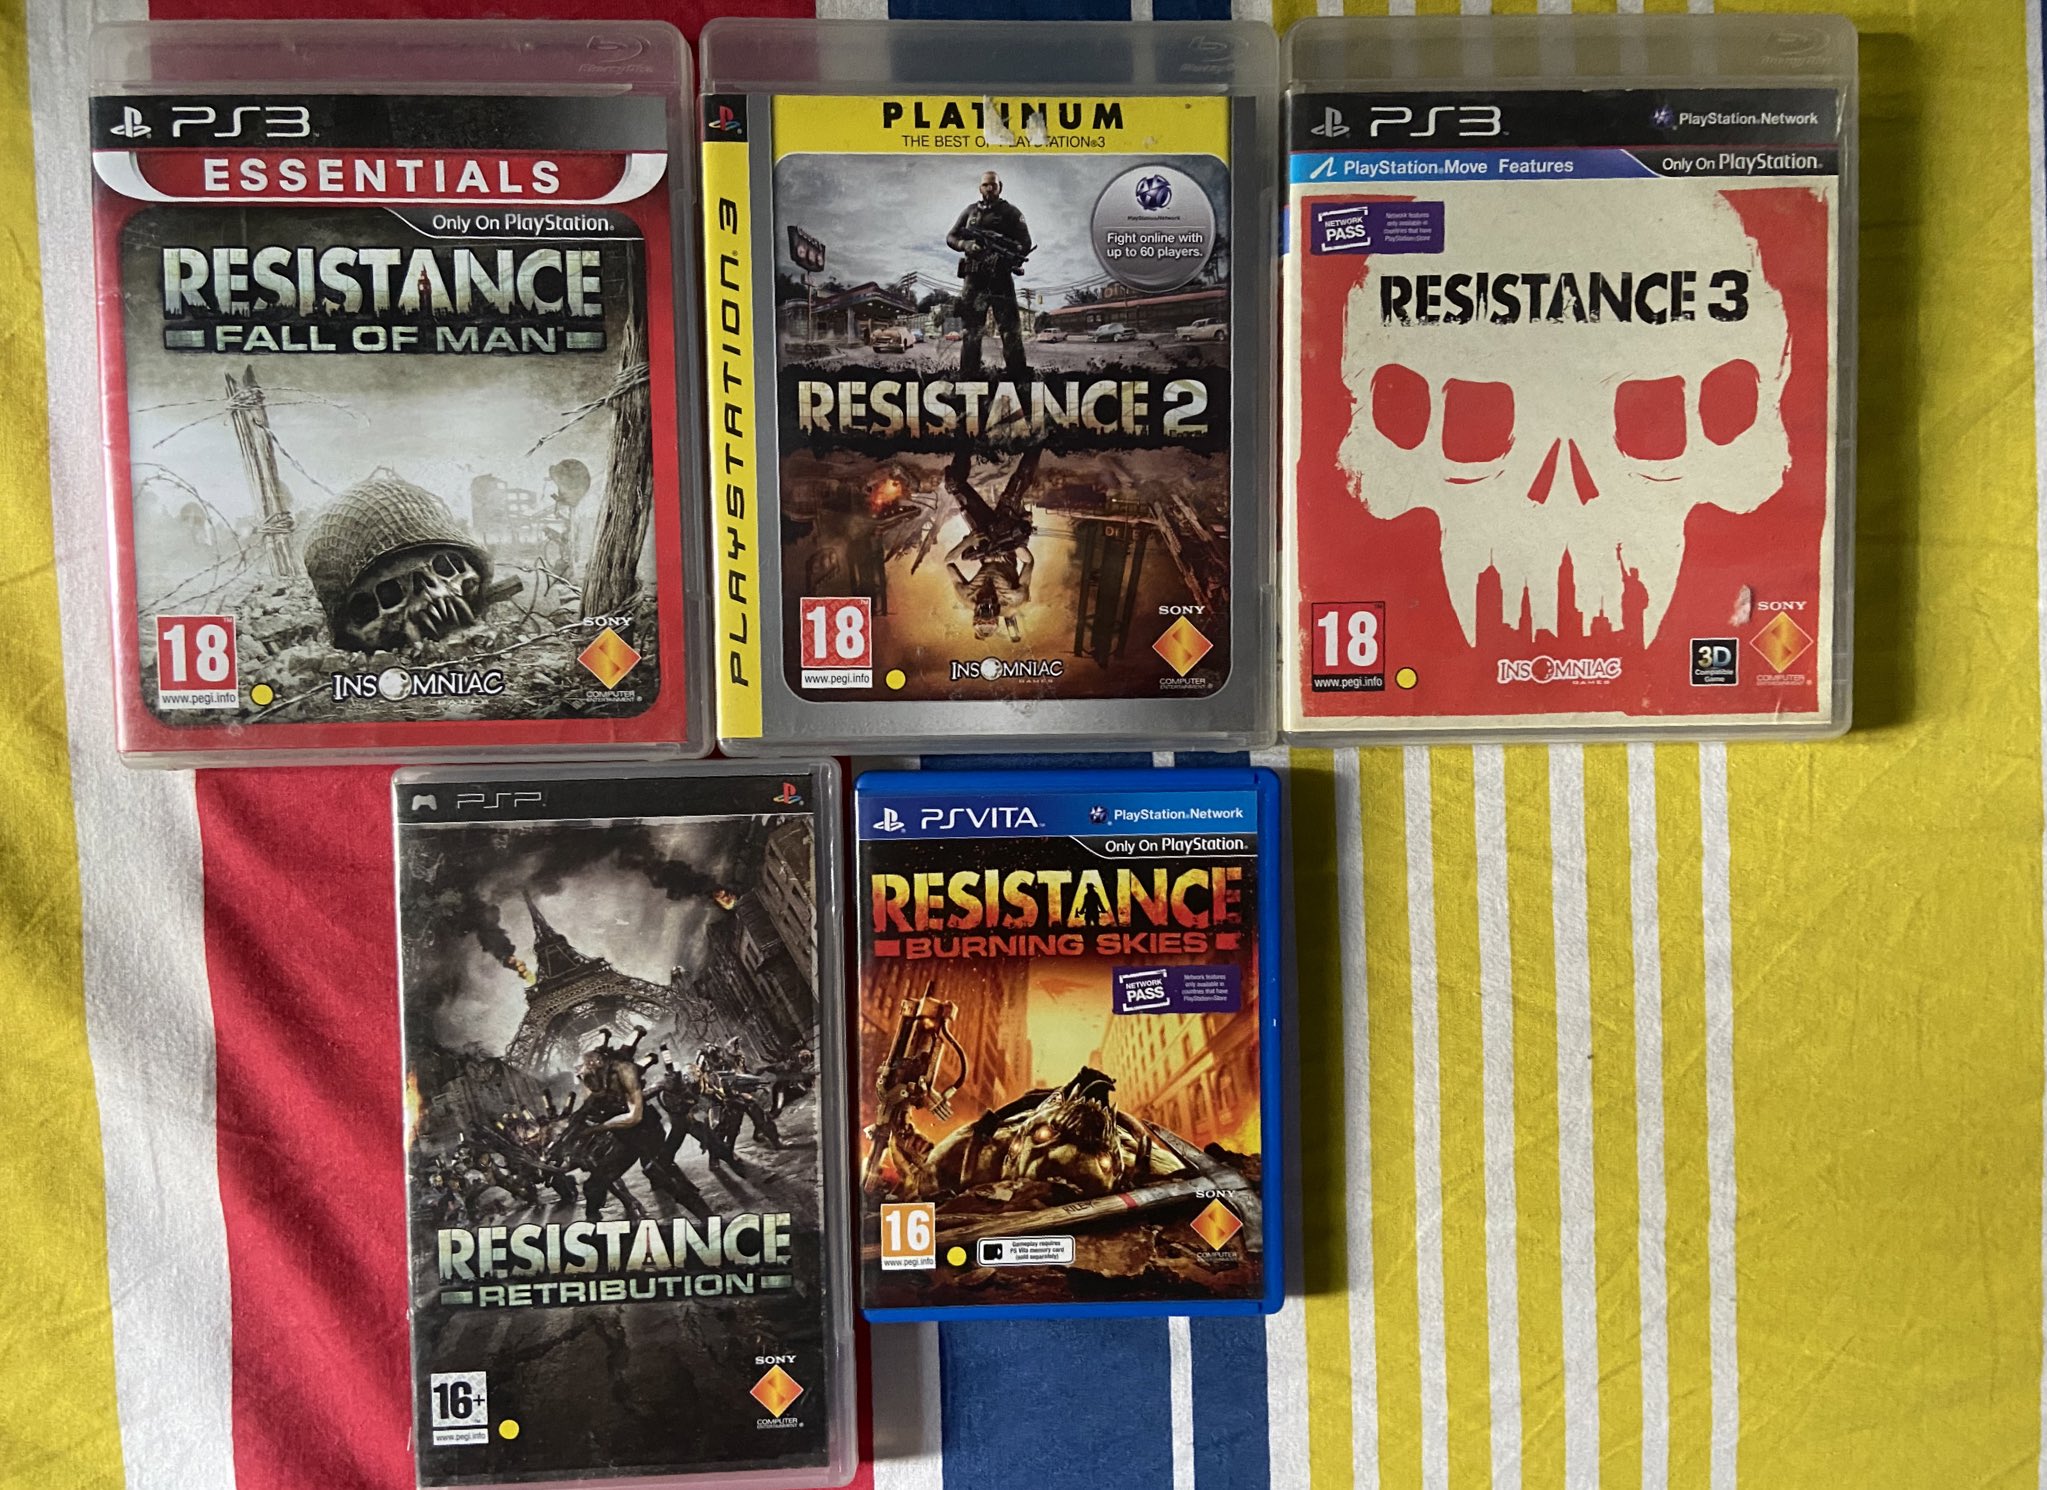 Pendu on Twitter: "And collection is complete 🤘🏻 @insomniacgames #playstation #Resistance #ps3 #ps4 #psvita #psp #ps5 #sony https://t.co/cAdNI55J8l" Twitter